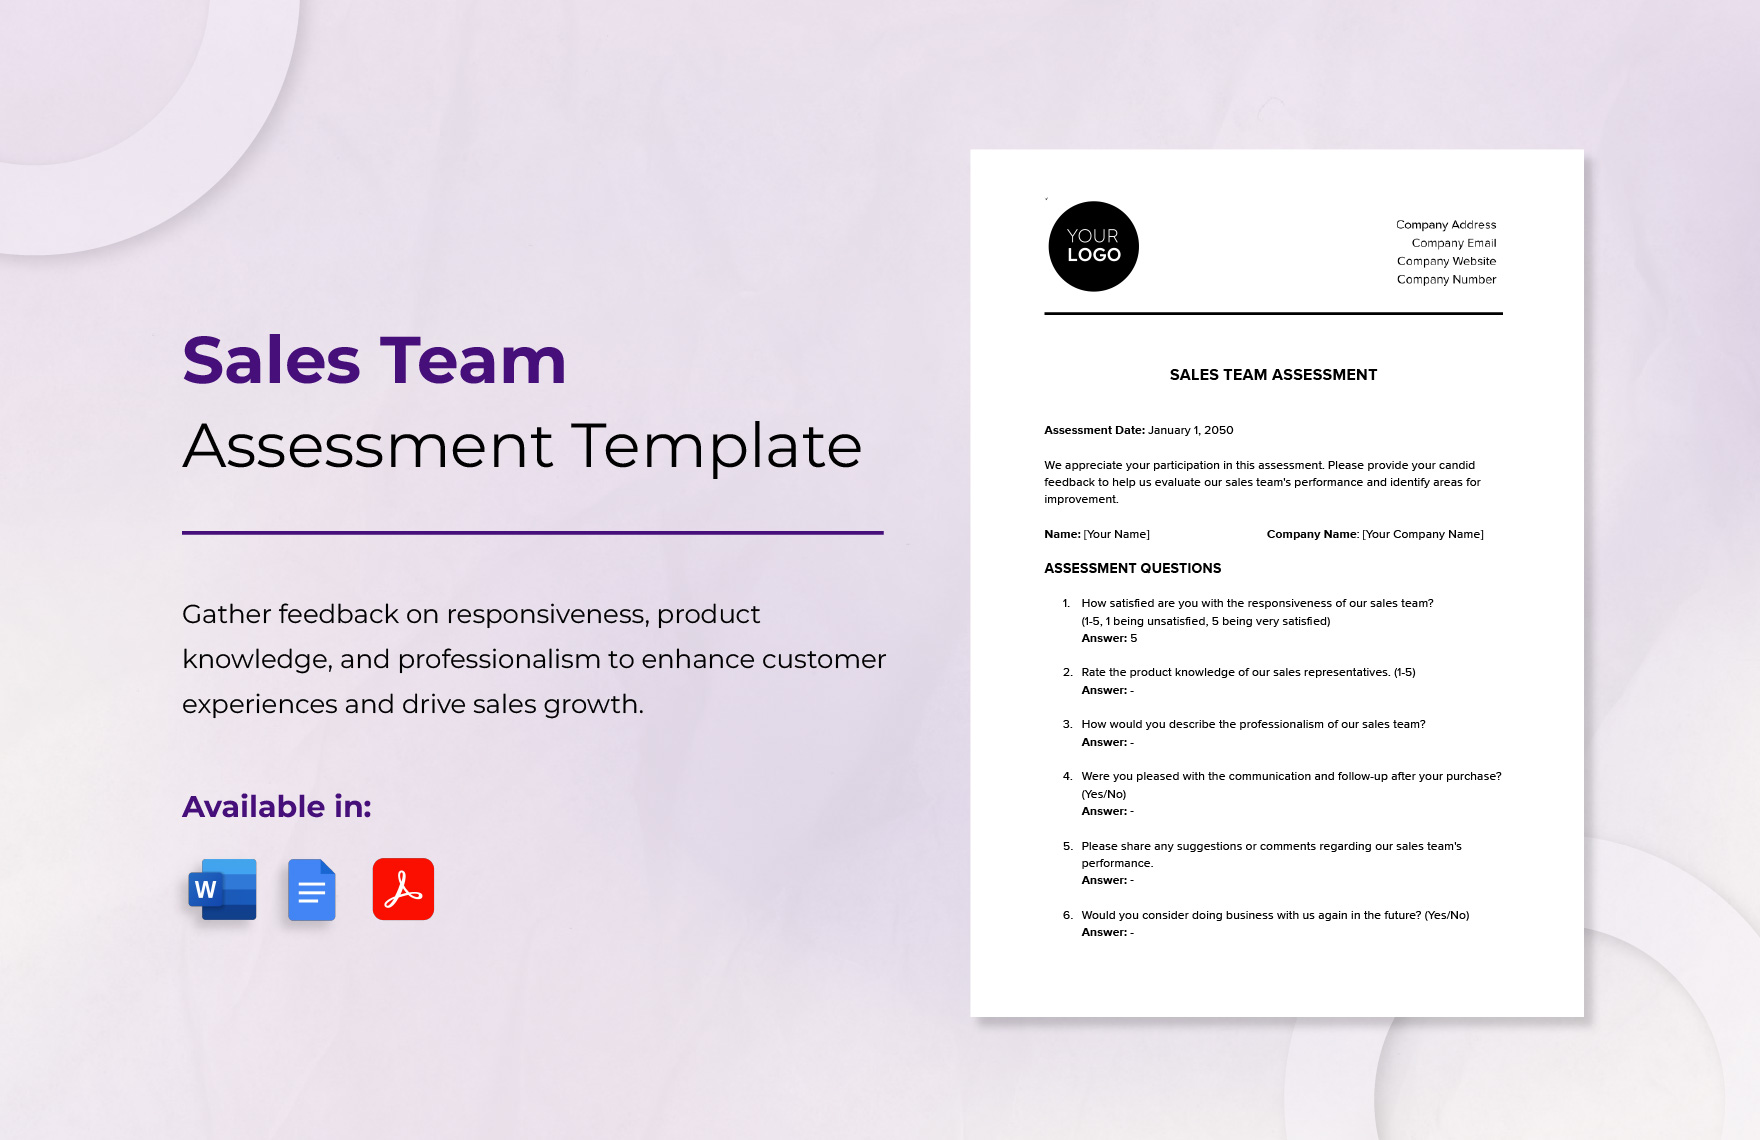 Sales Team Assessment Template in Word, Google Docs, PDF